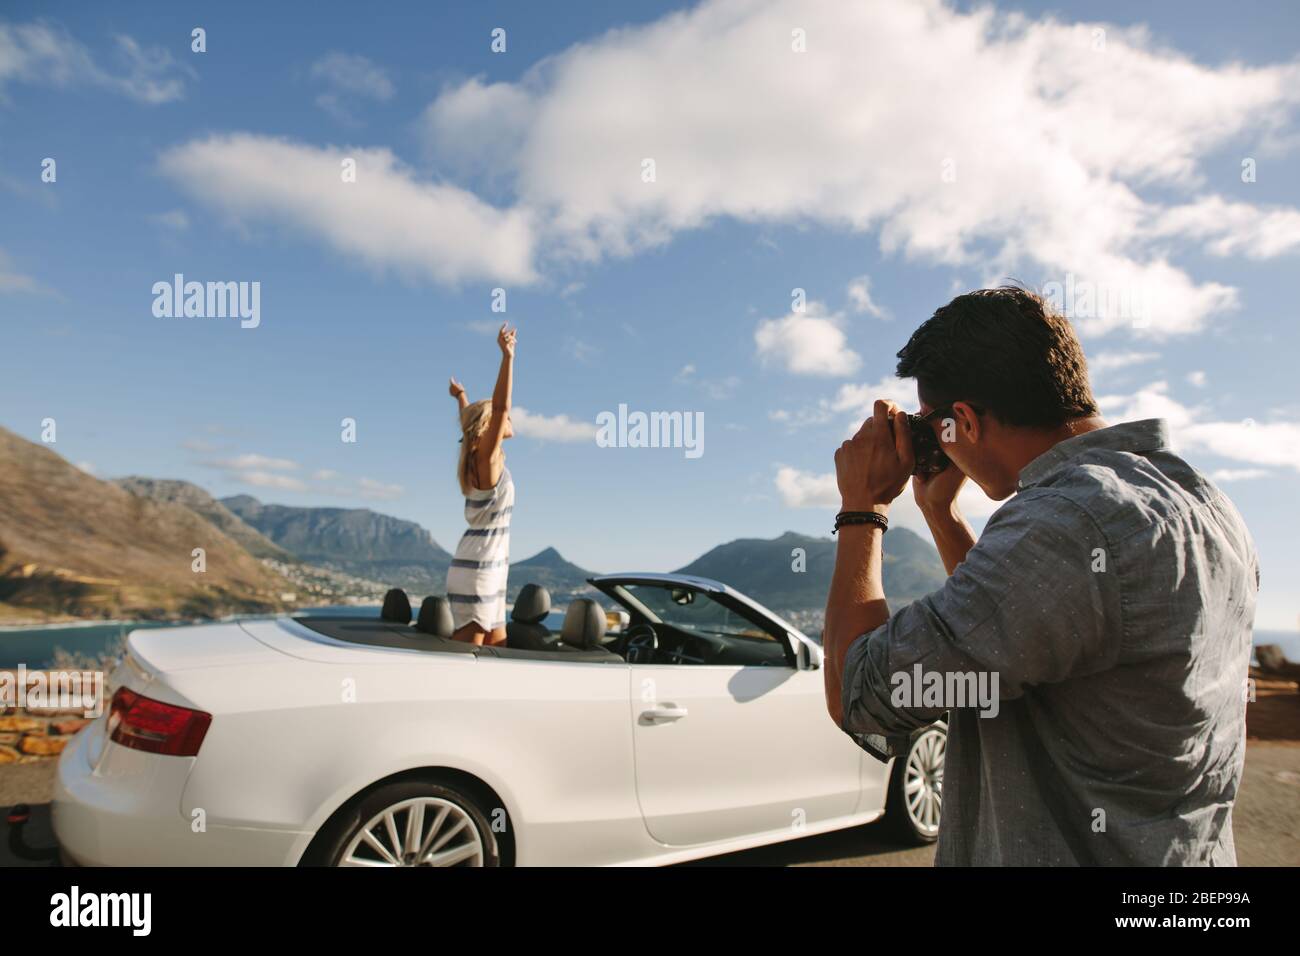 Man taking pictures of a woman standing in a convertible car. Couple taking pictures on road trip. Stock Photo